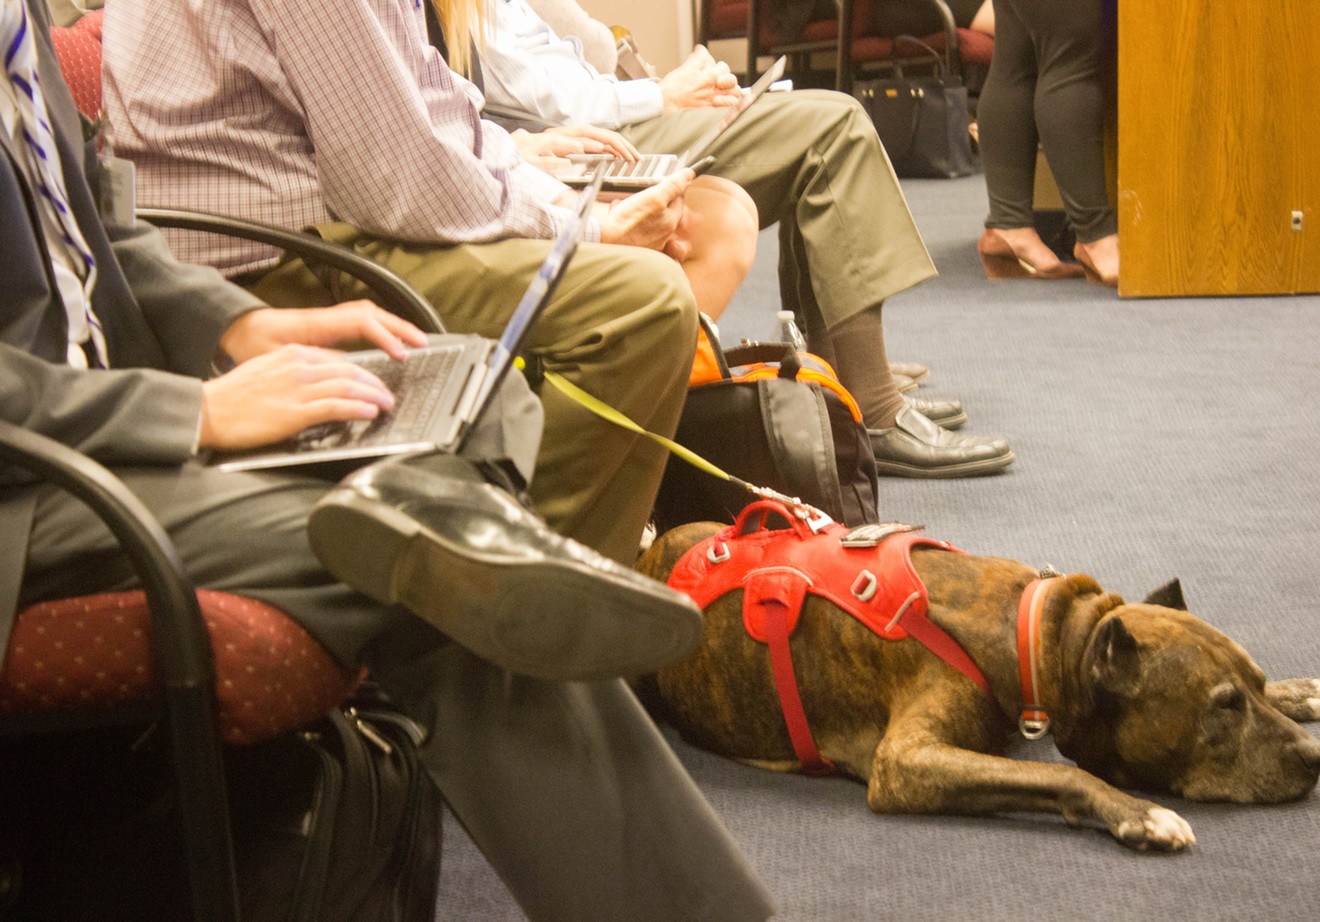 A service dog naps during Wednesday's Senate Government Committee hearing.